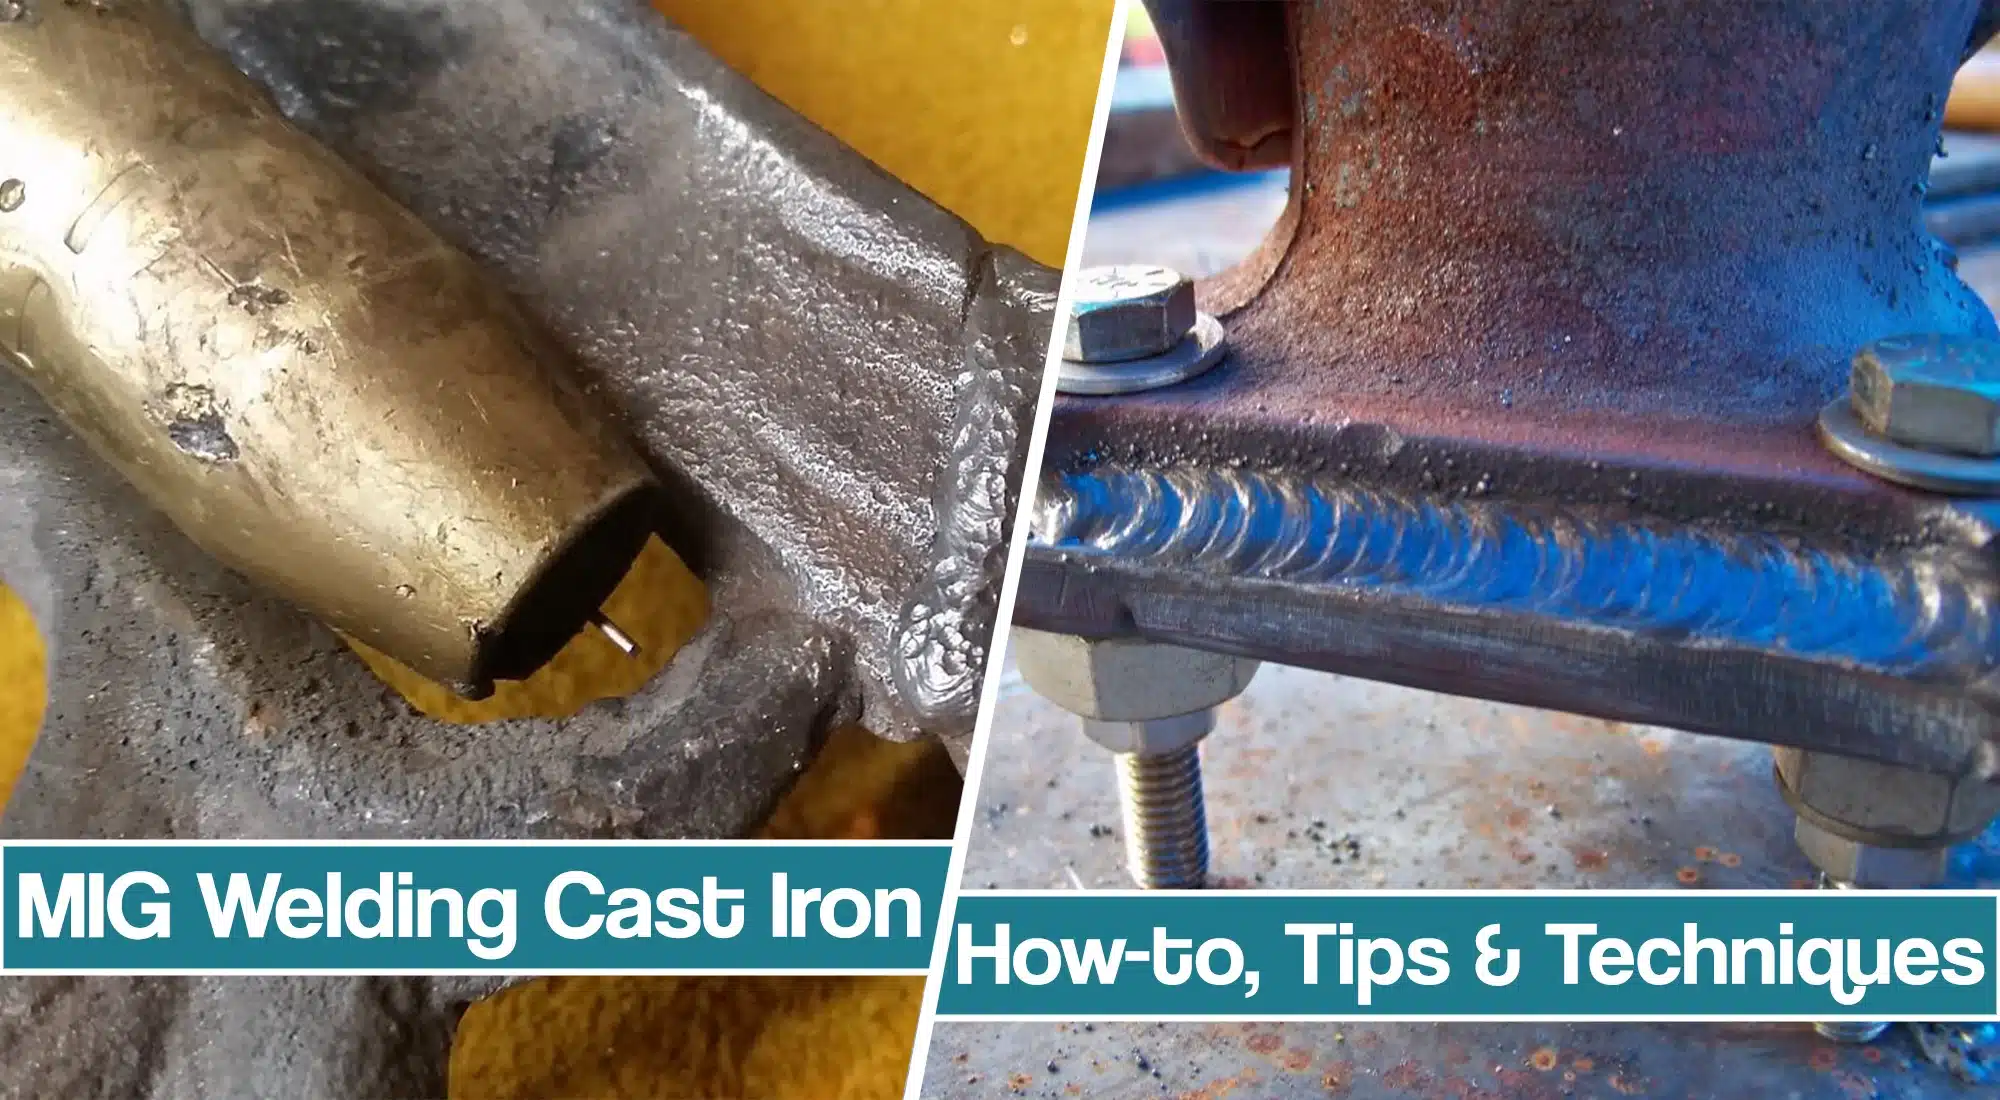 How To MIG Weld Cast Iron – techniques & Tips